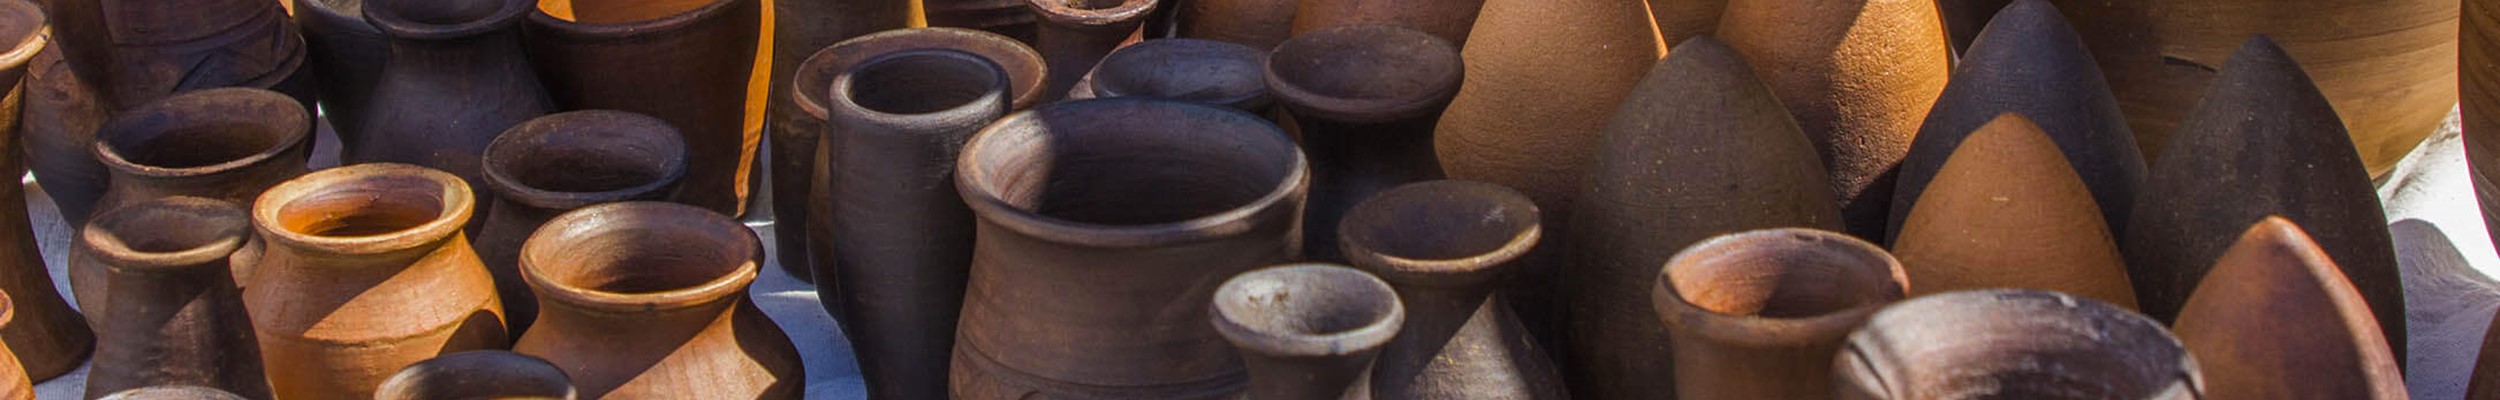 A collection of pottery